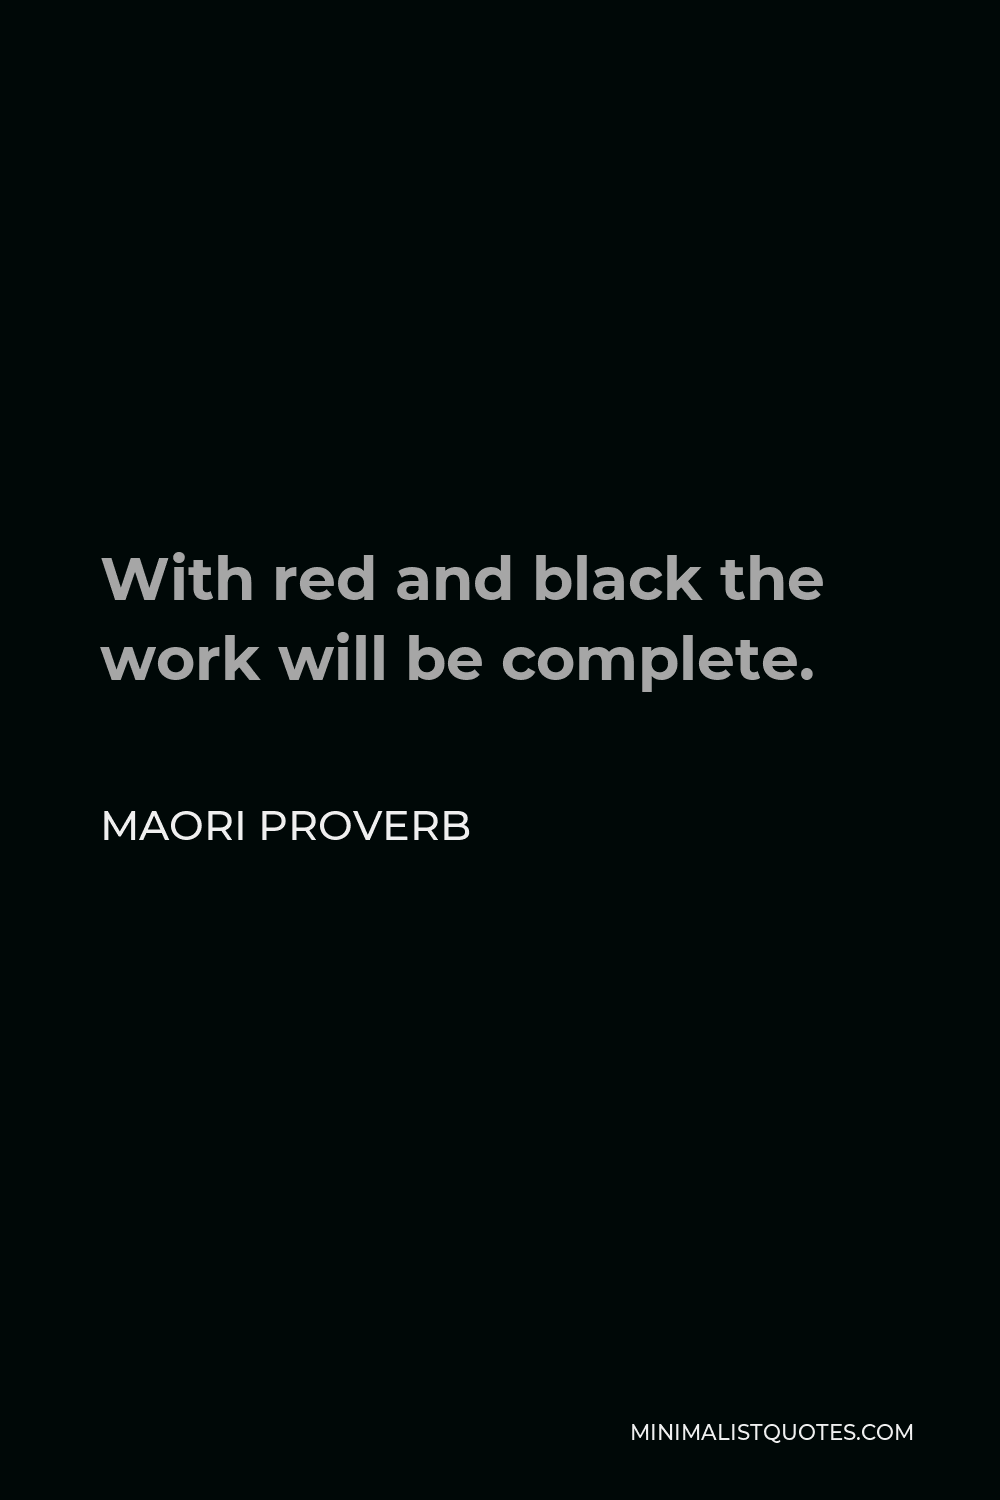 Maori Proverb Quote - With red and black the work will be complete.